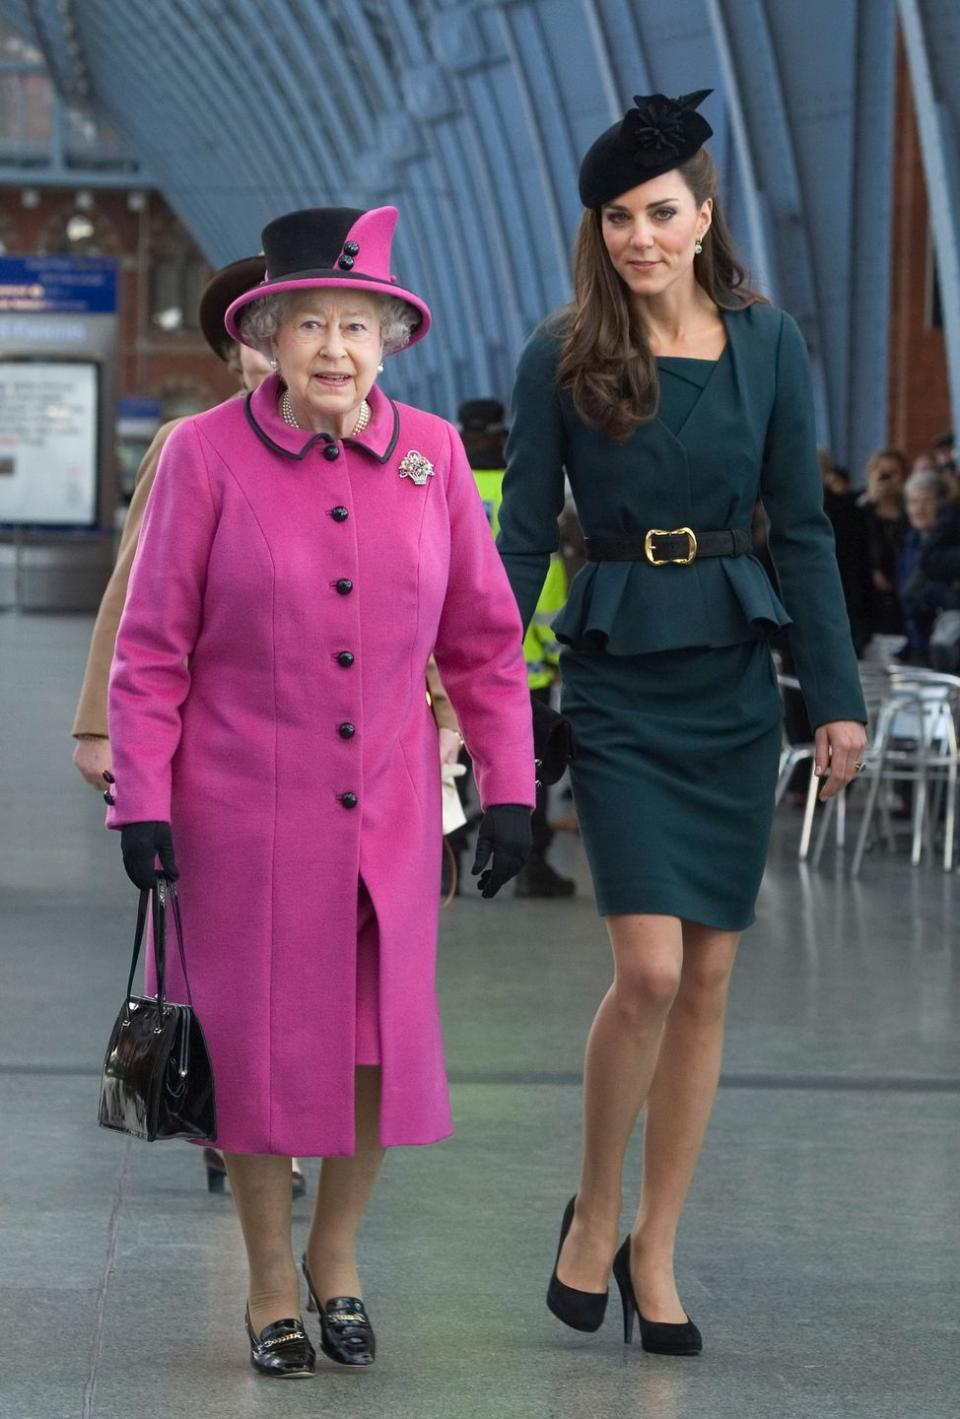 Queen Elizabeth prefers dresses and skirts over pants.